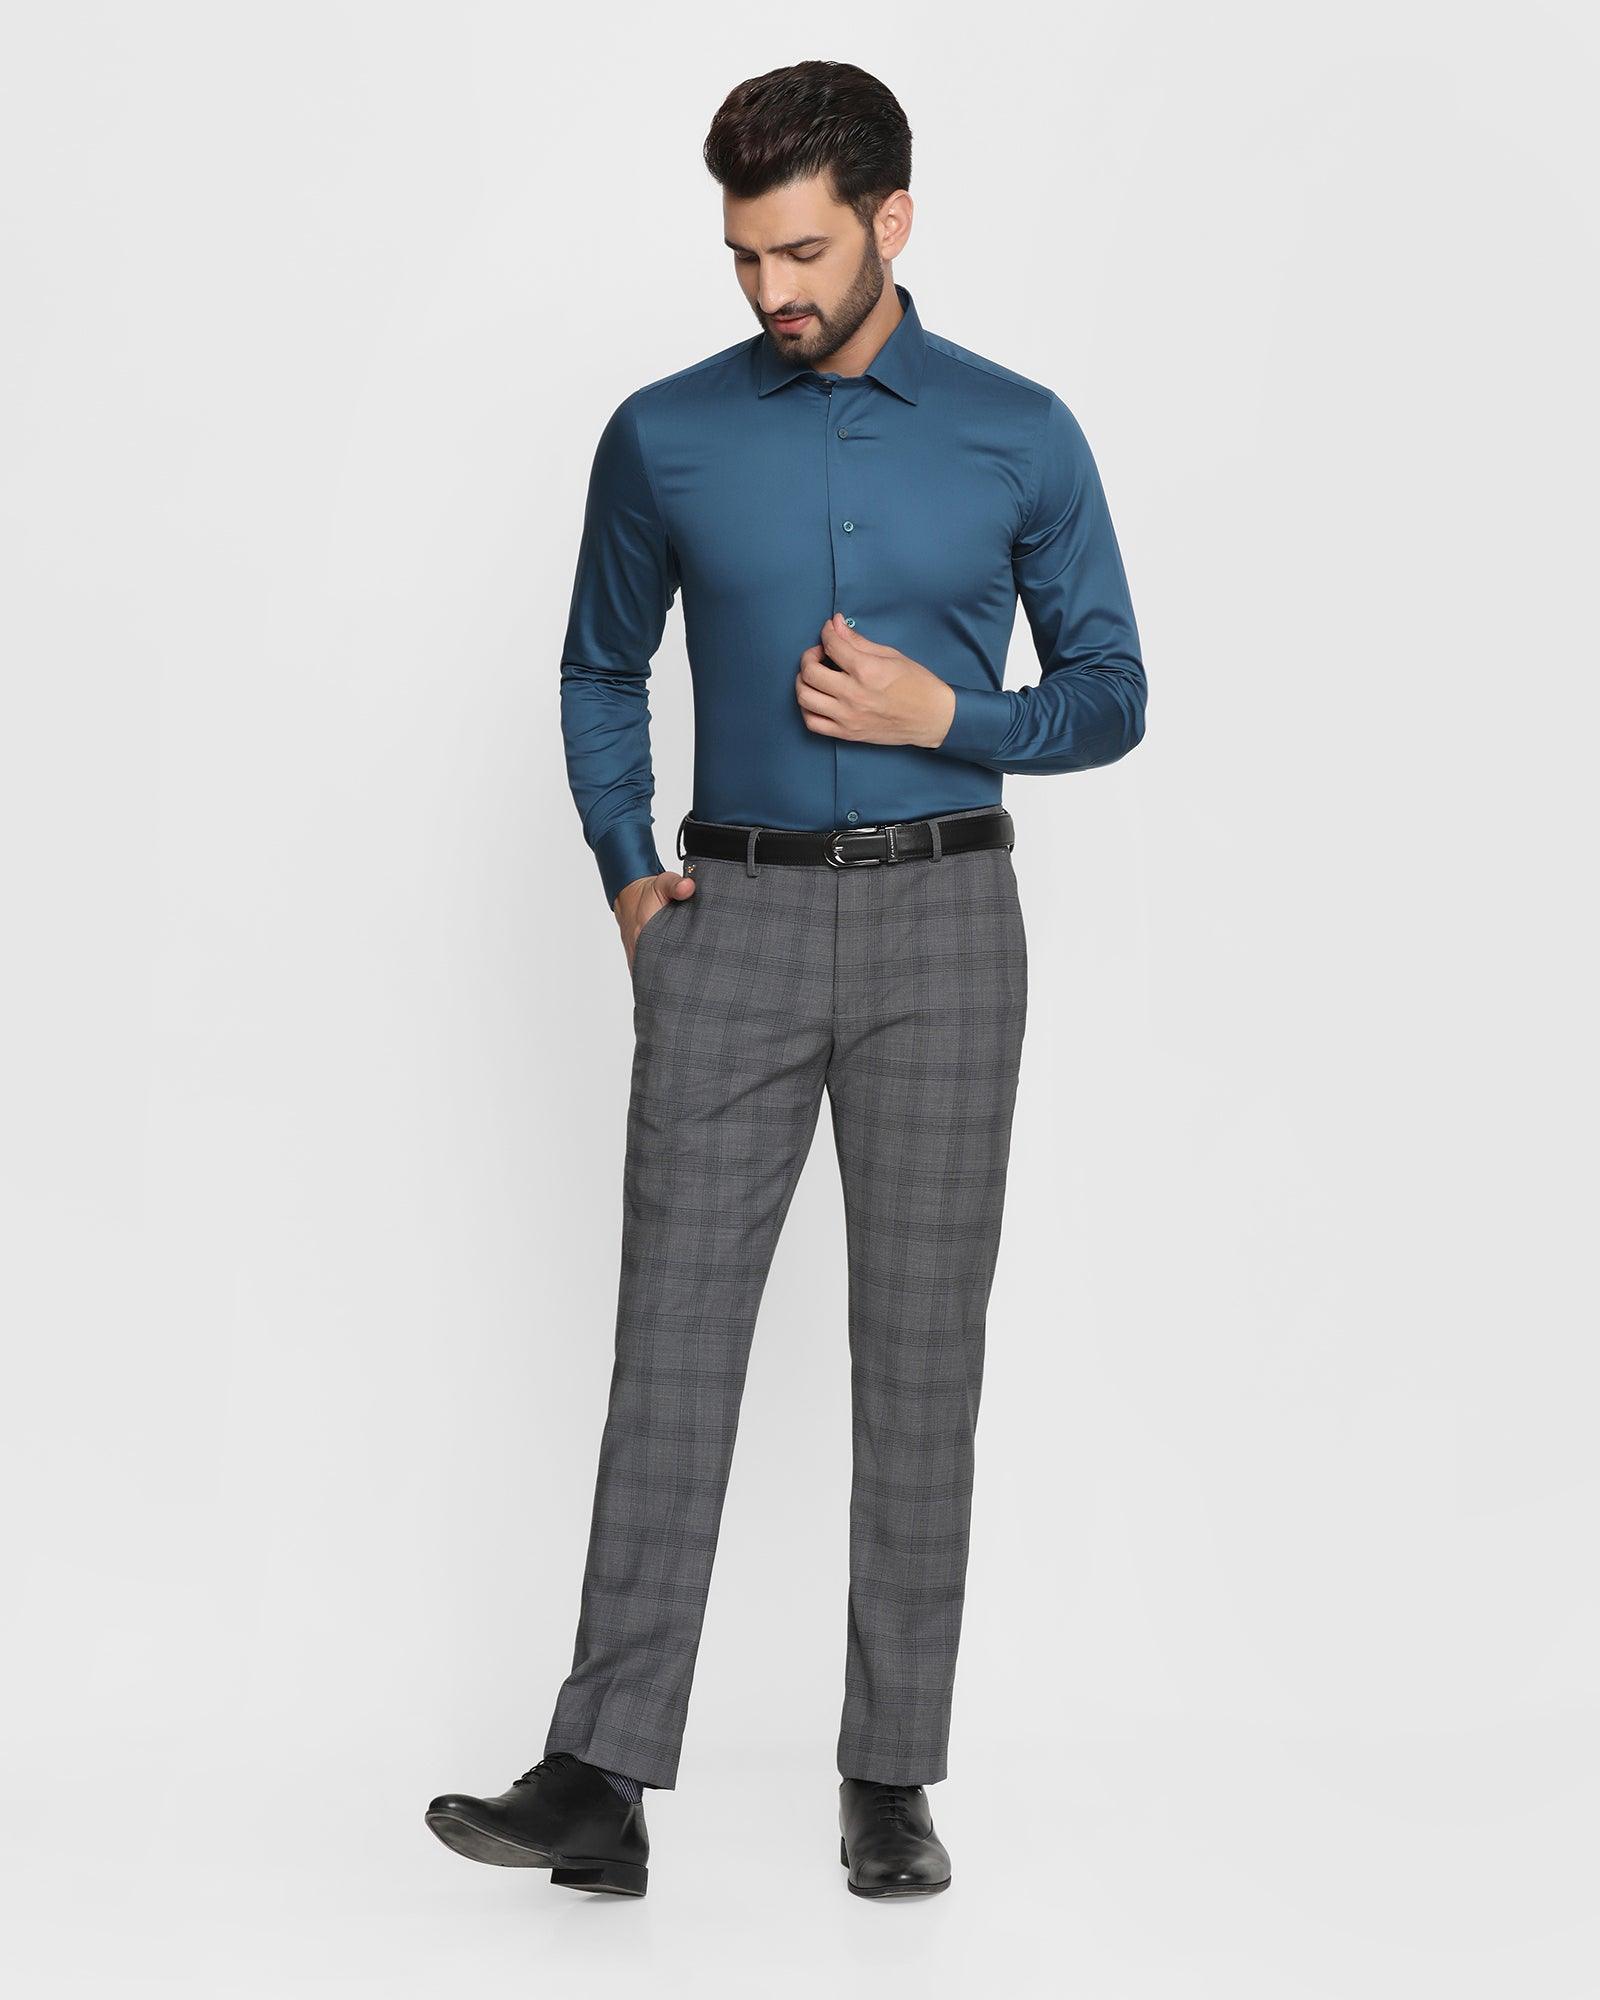 Latest Formal Shirt Pant Combination For men's, Office Dress